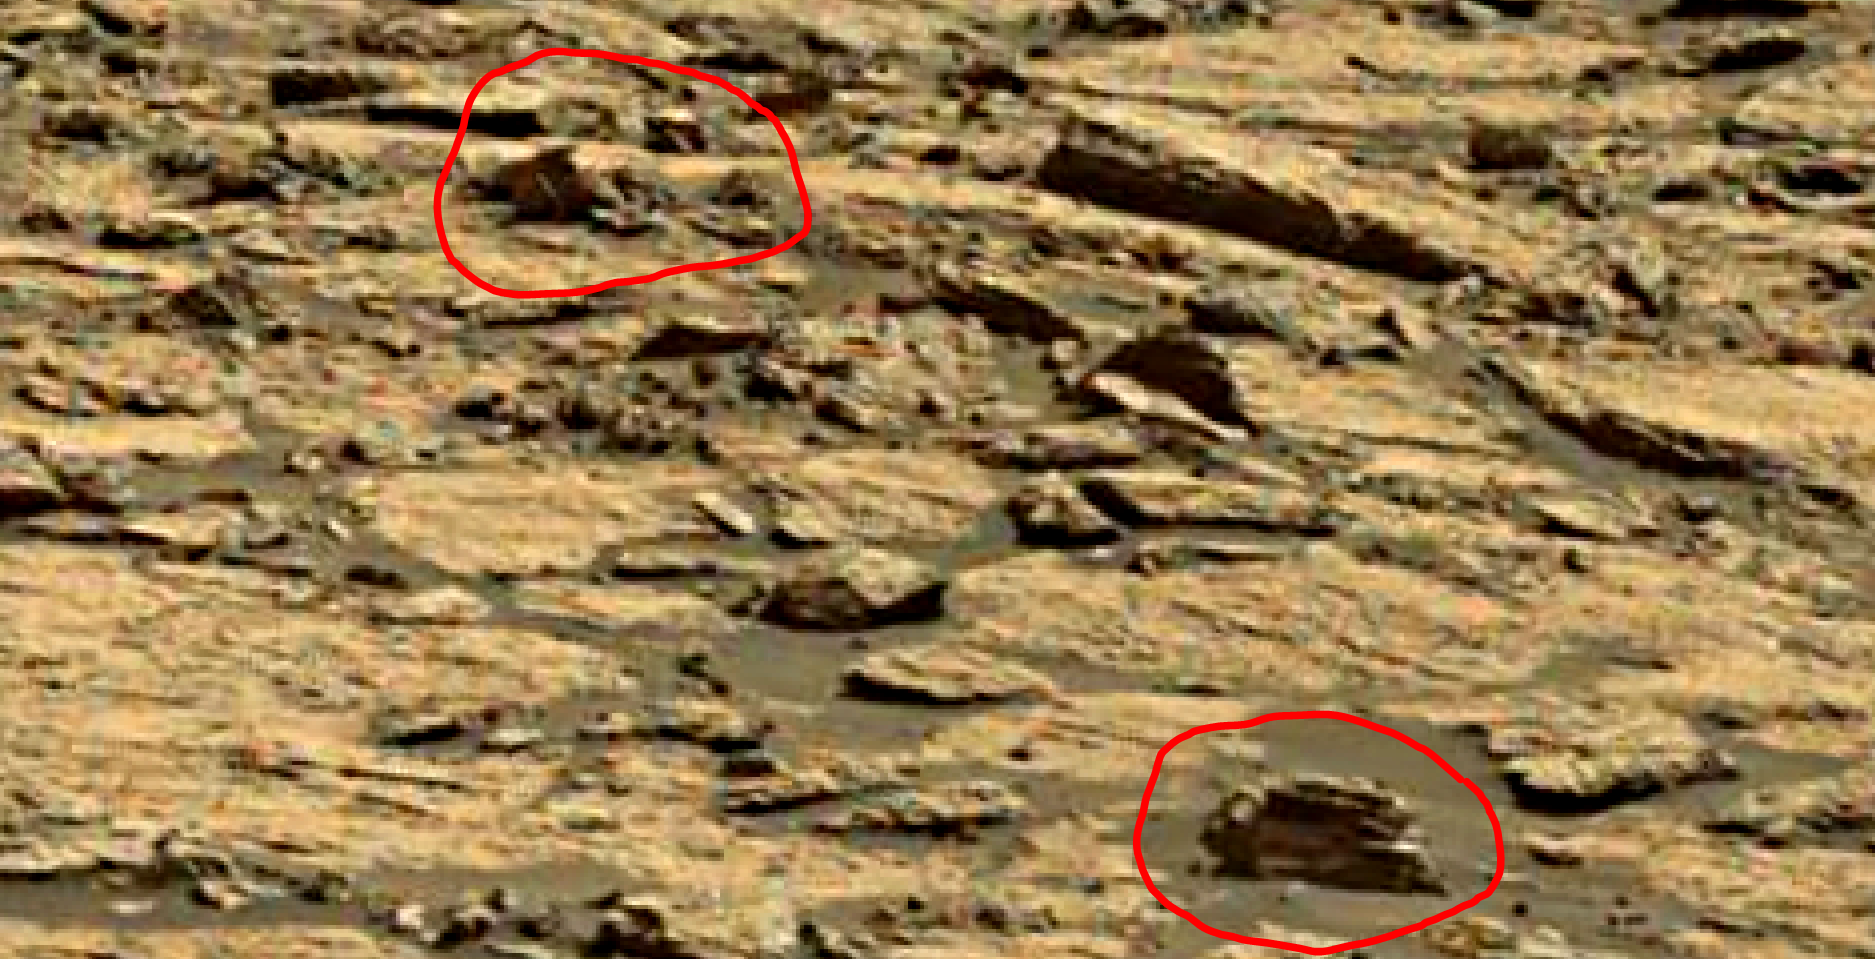 mars sol 1435 anomaly artifacts 1-1 was life on mars